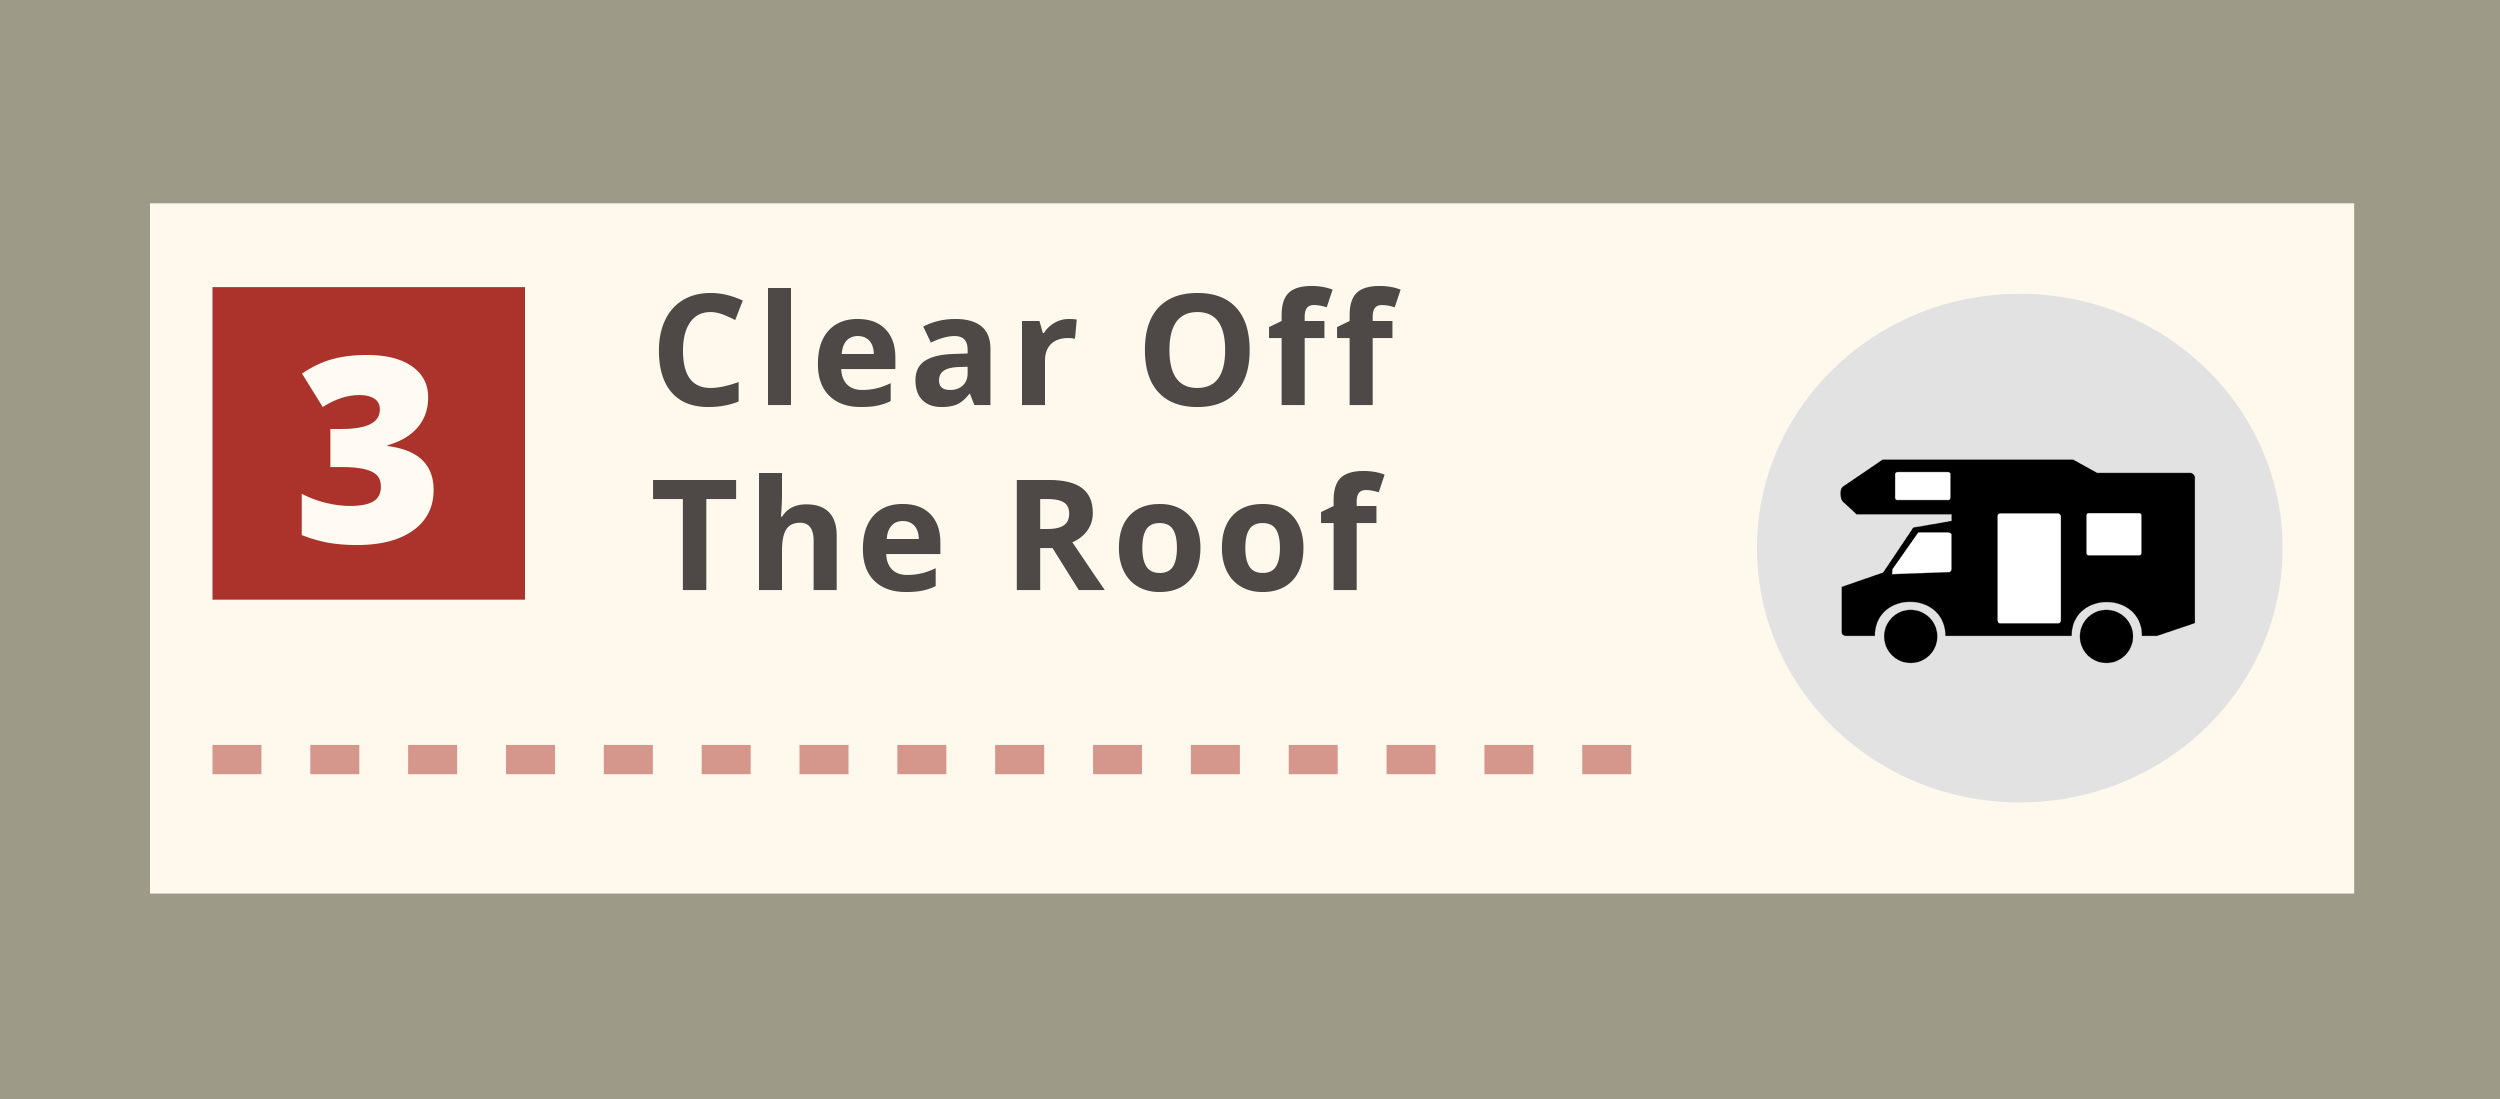 Clear off the Roof